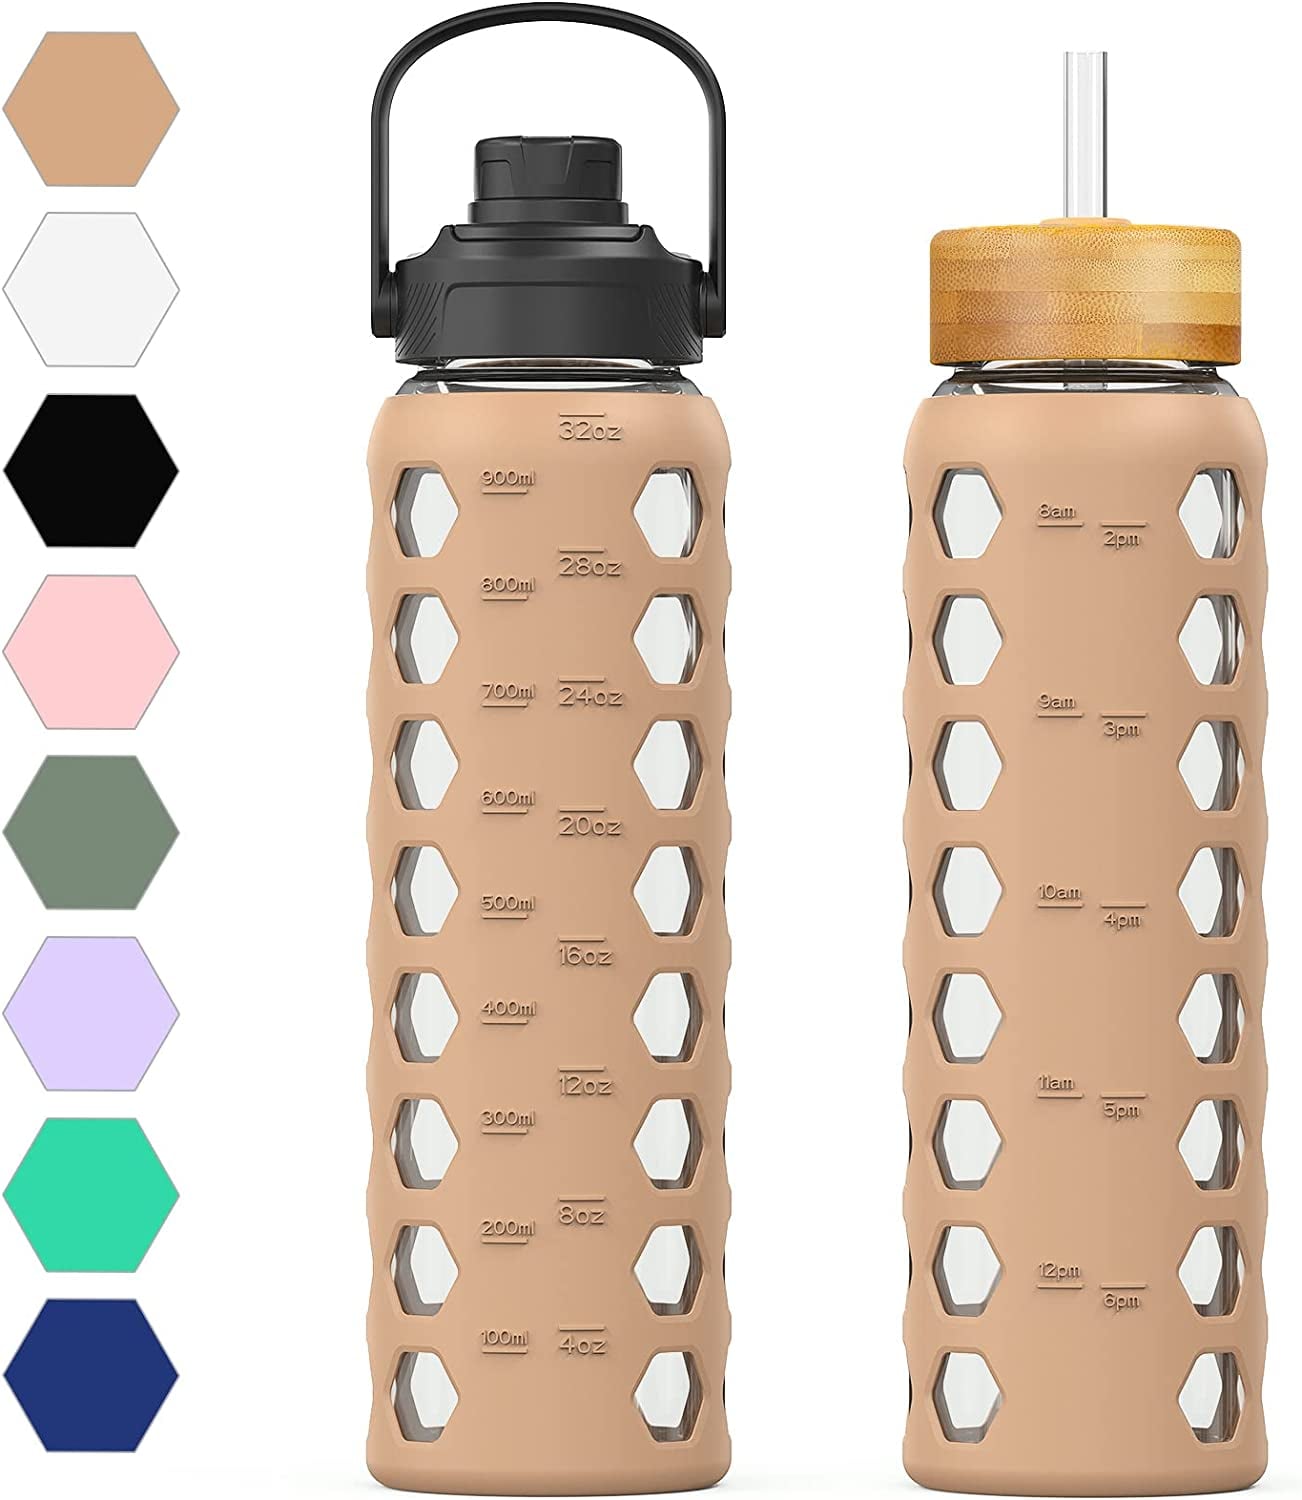 5 Aesthetic Water Bottles Can Keep You Up with Trends